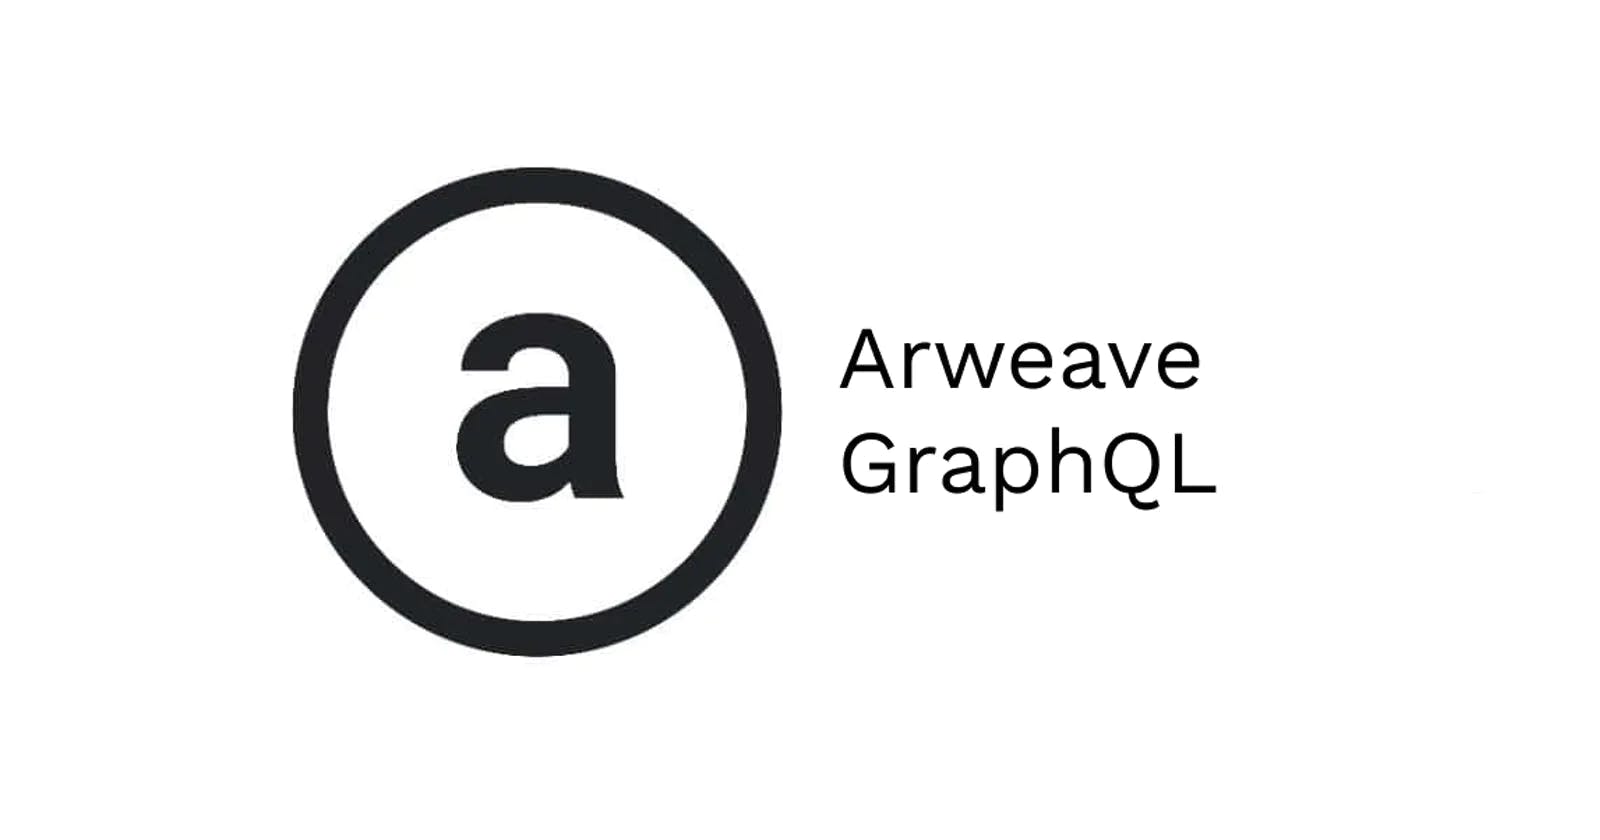 Creating and querying tags with Arweave